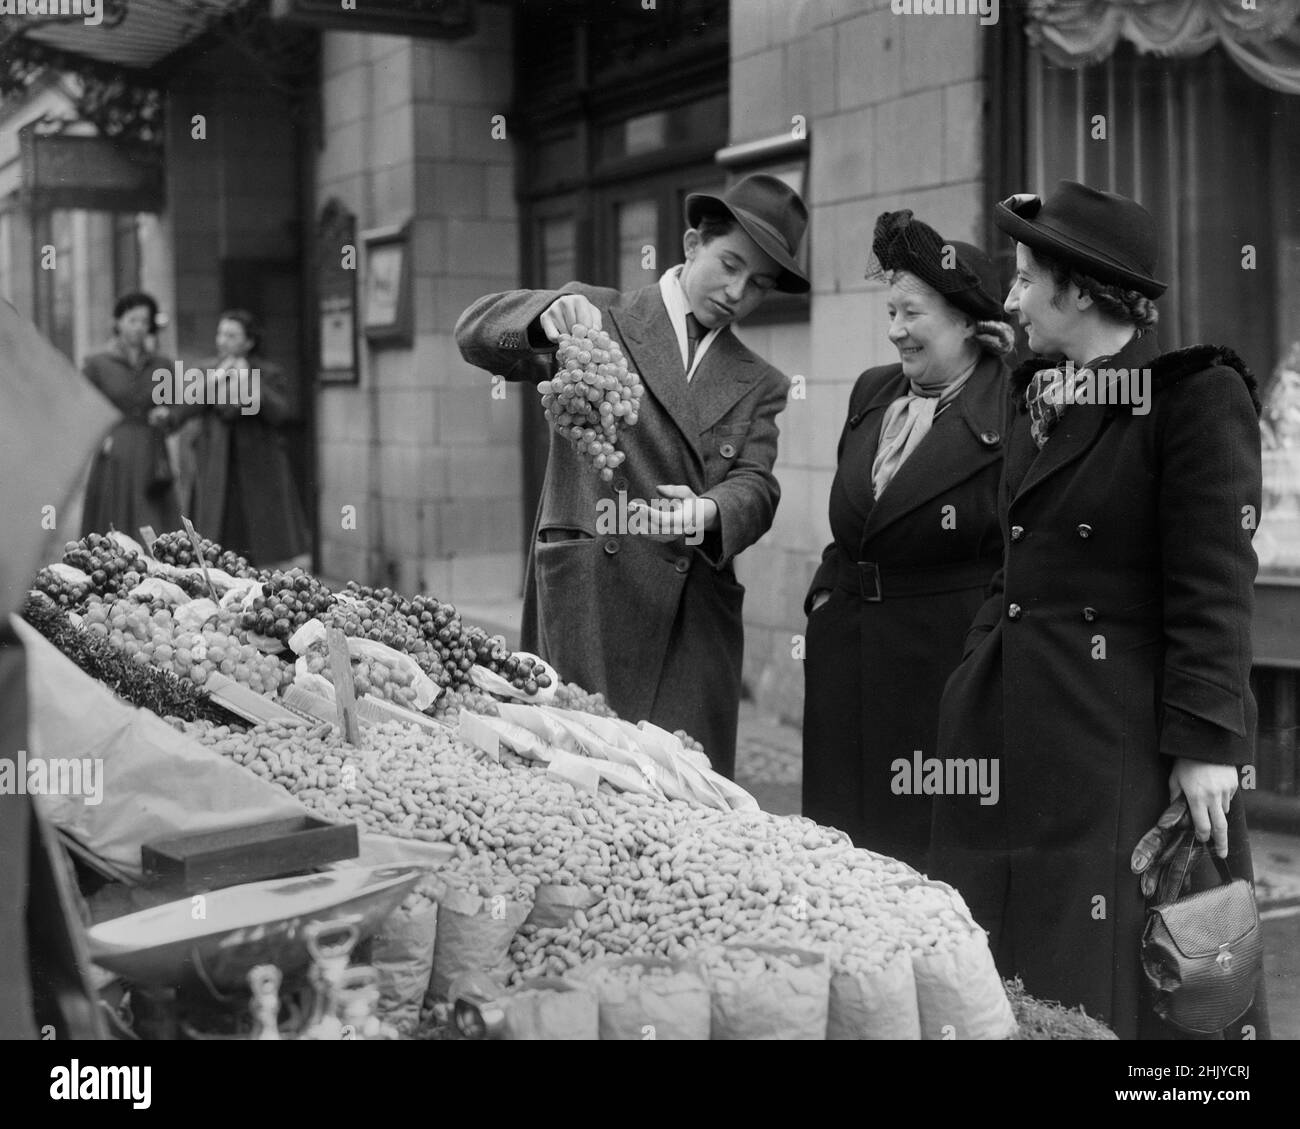 LONDON: A barrow boy sells a bunch of grapes to two middle aged women, from his fruit and vegetables stall, on The Strand in London in the 1940’s. Credit: The DL Archive Collection/Alamy Stock Photo